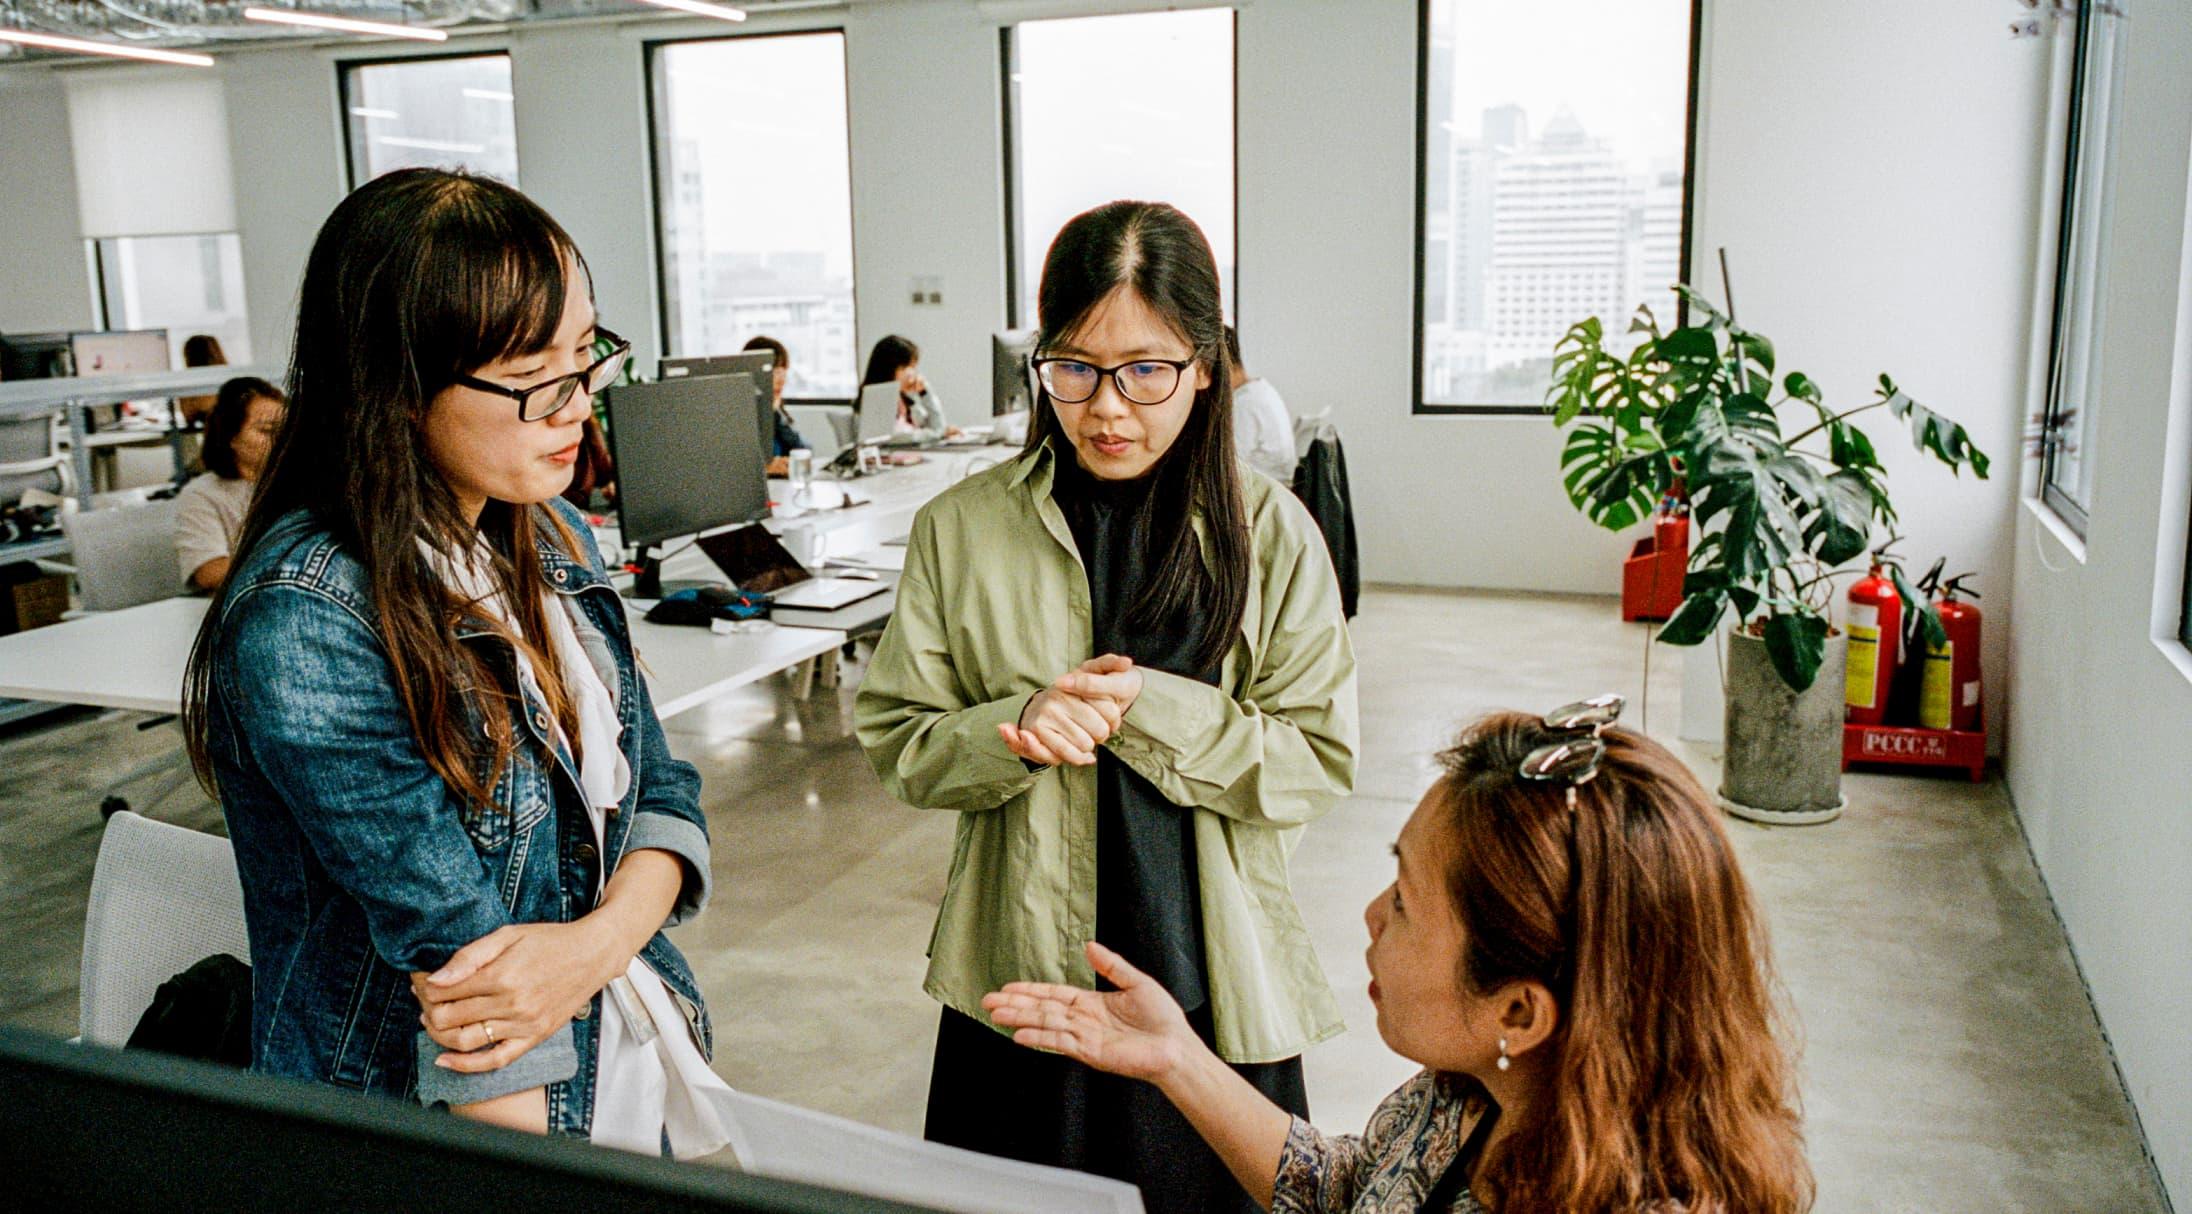 A group of woman having a discussion in the workplace